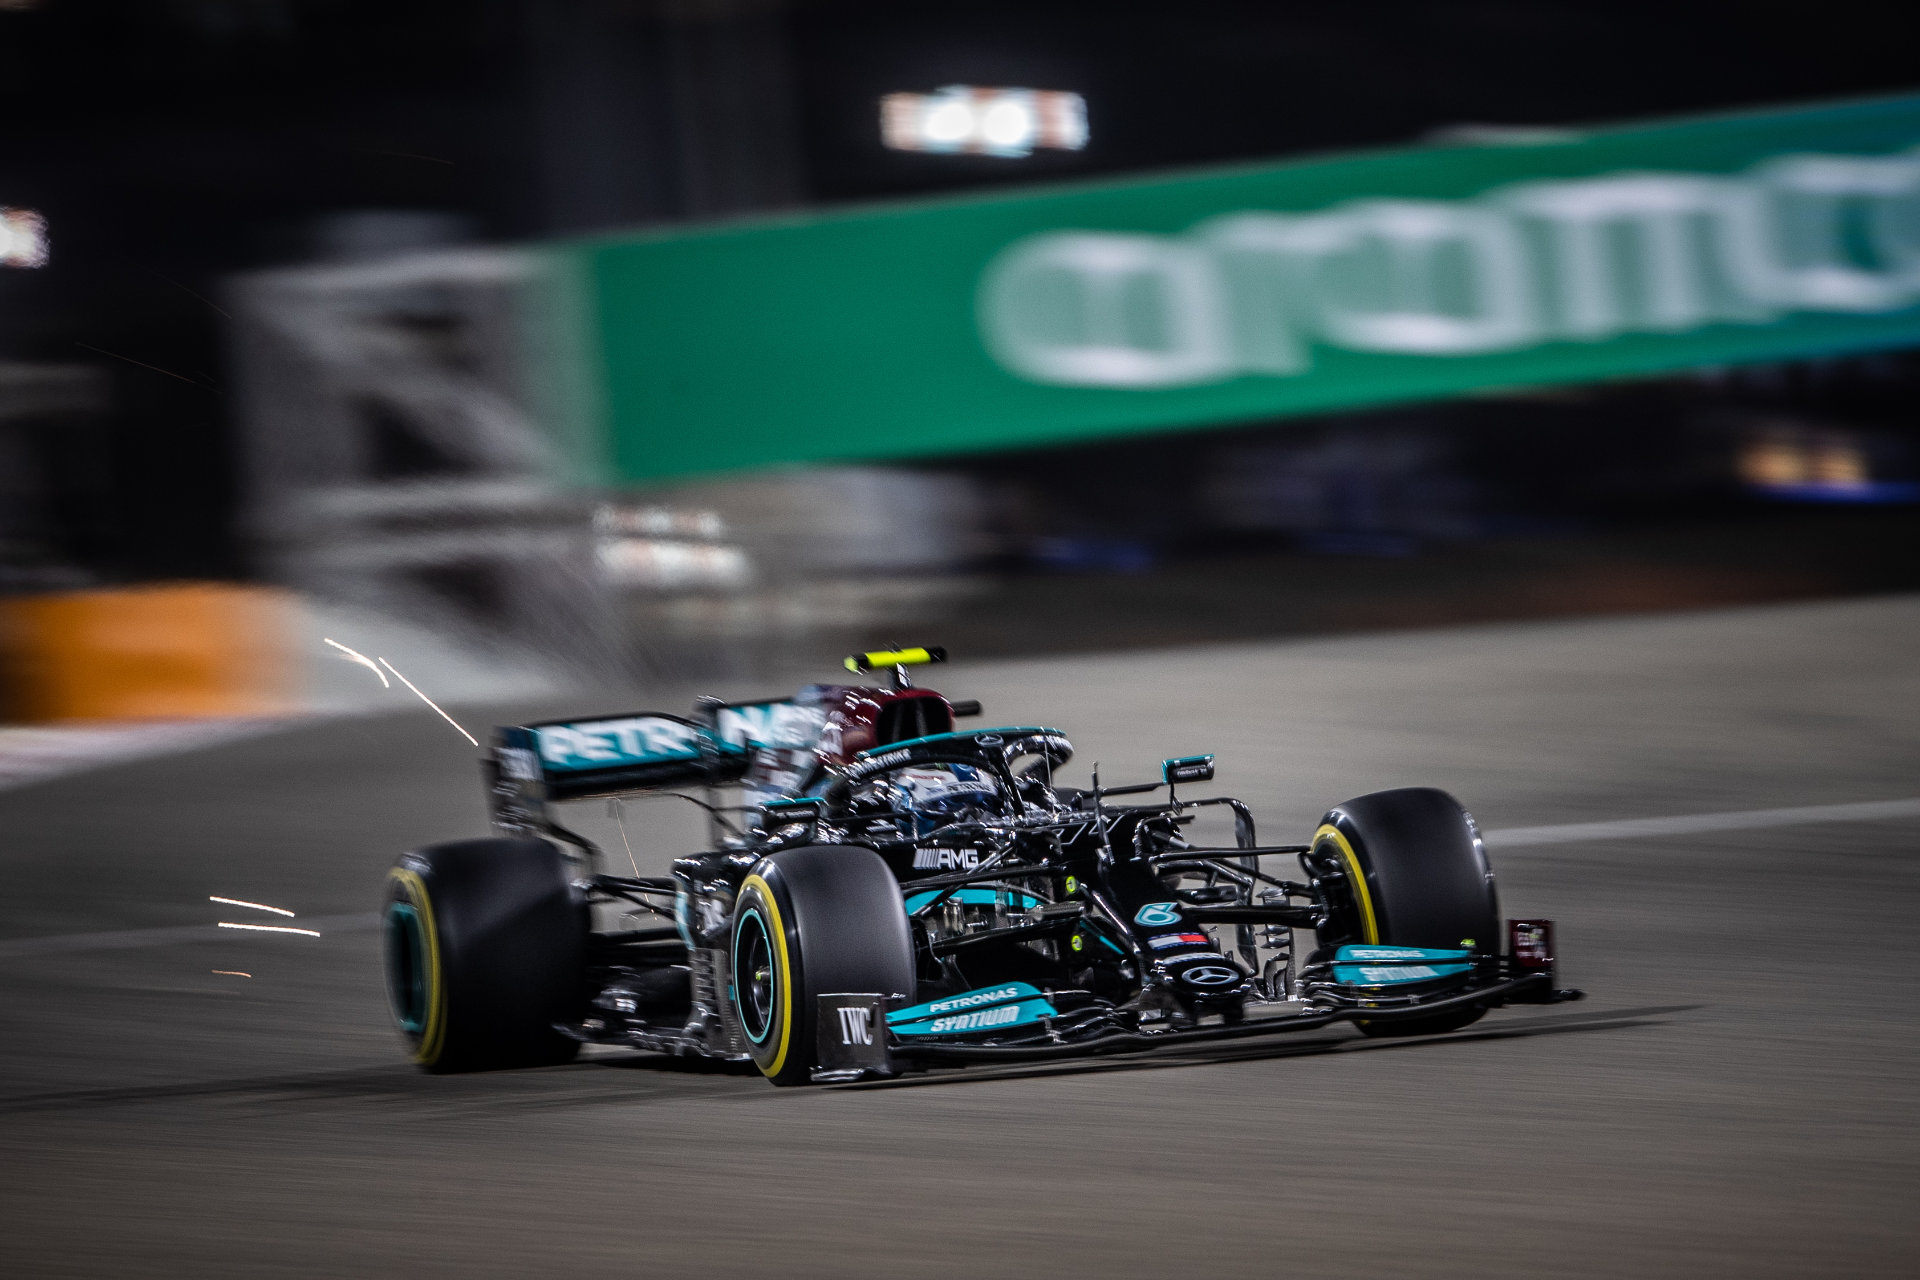 Spies Hecker Puts The Mercedes-AMG Petronas F1 Team Back In Black For 2021